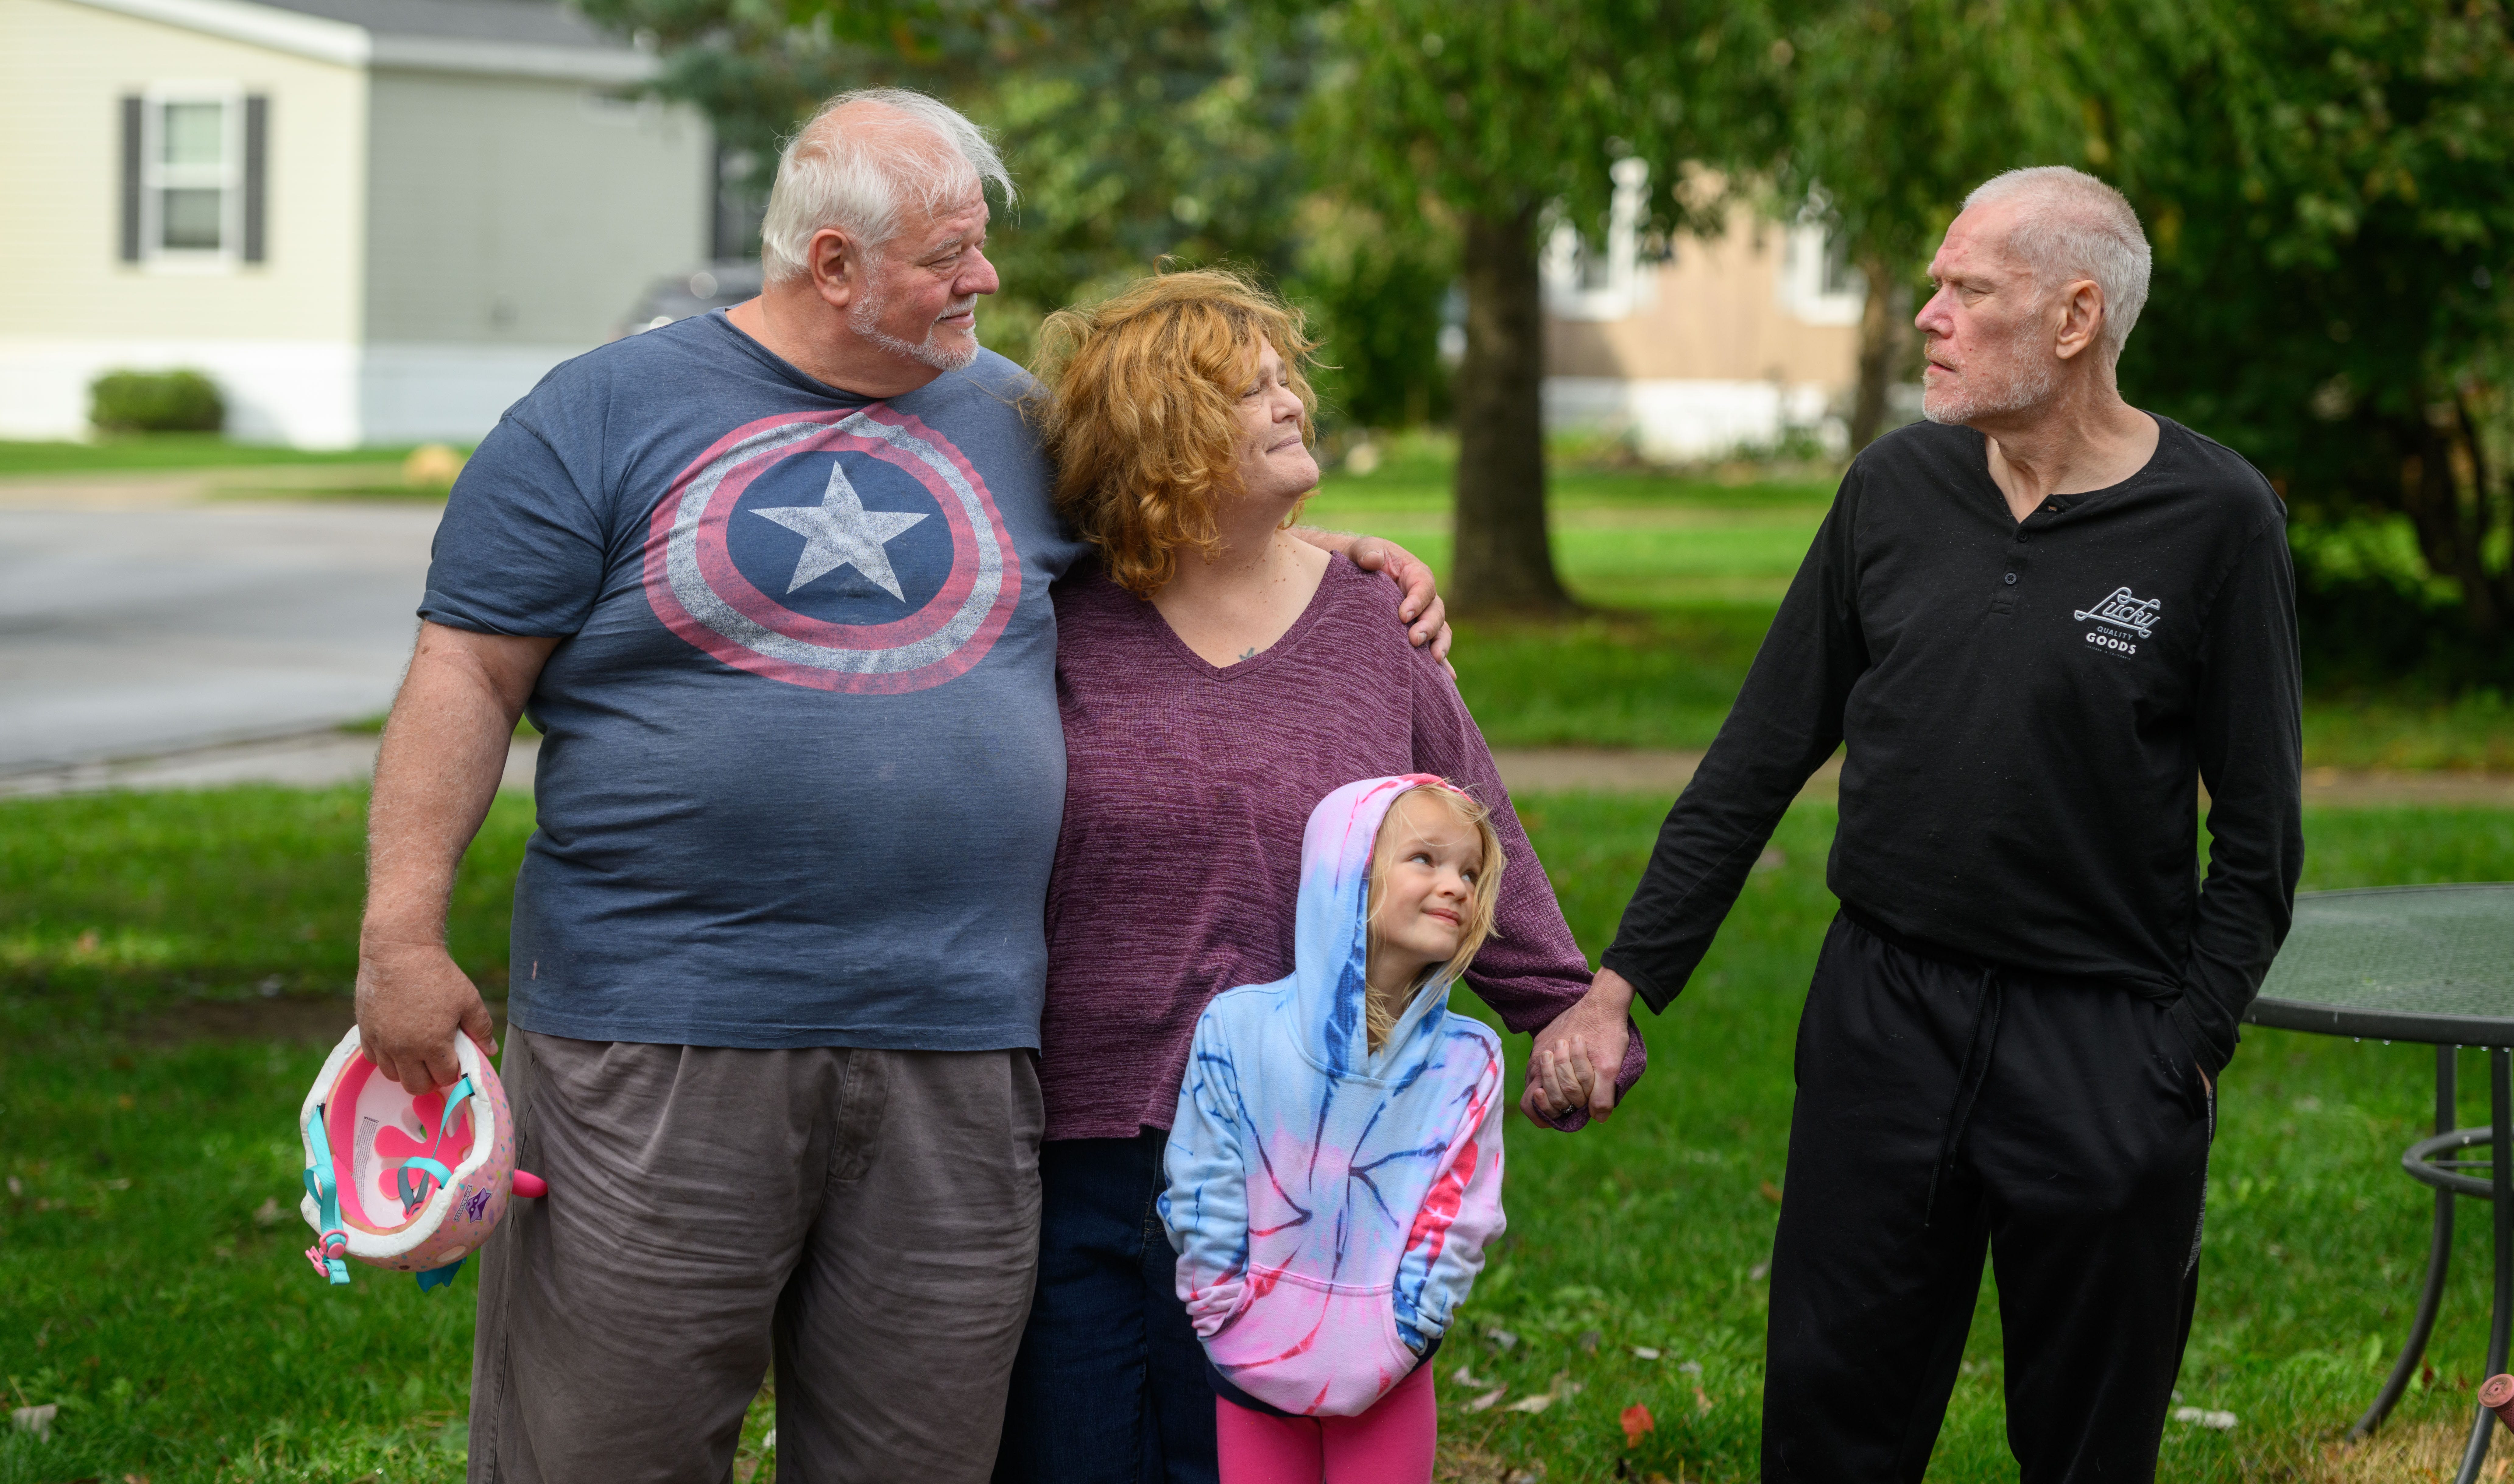 Ken Firth, from left, his wife, Sue, their six-year-old granddaughter. Aurora Hendry, and Ken’s brother-in-law, Grant Abrams, at their home in White Lake Township. Ken and Sue are caretakers for Grant, who is autistic, as well as their granddaughter.